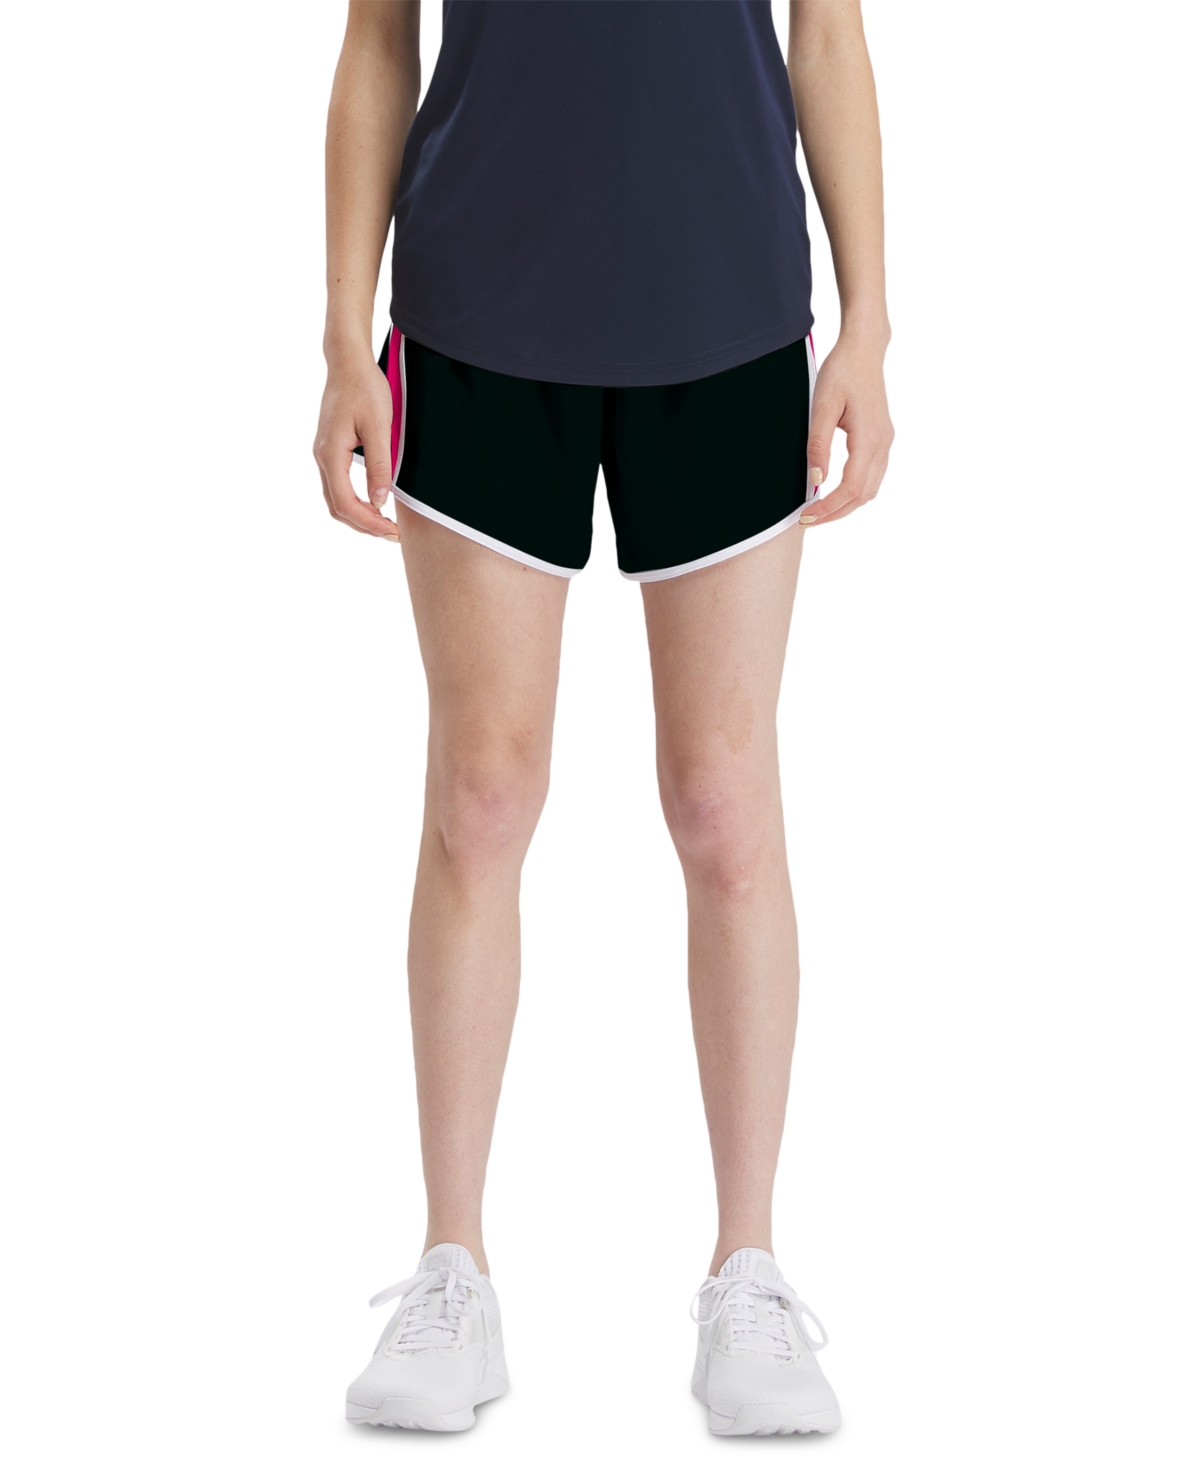 Women's Active Identity Training Pull-On Woven Shorts - Black/pink